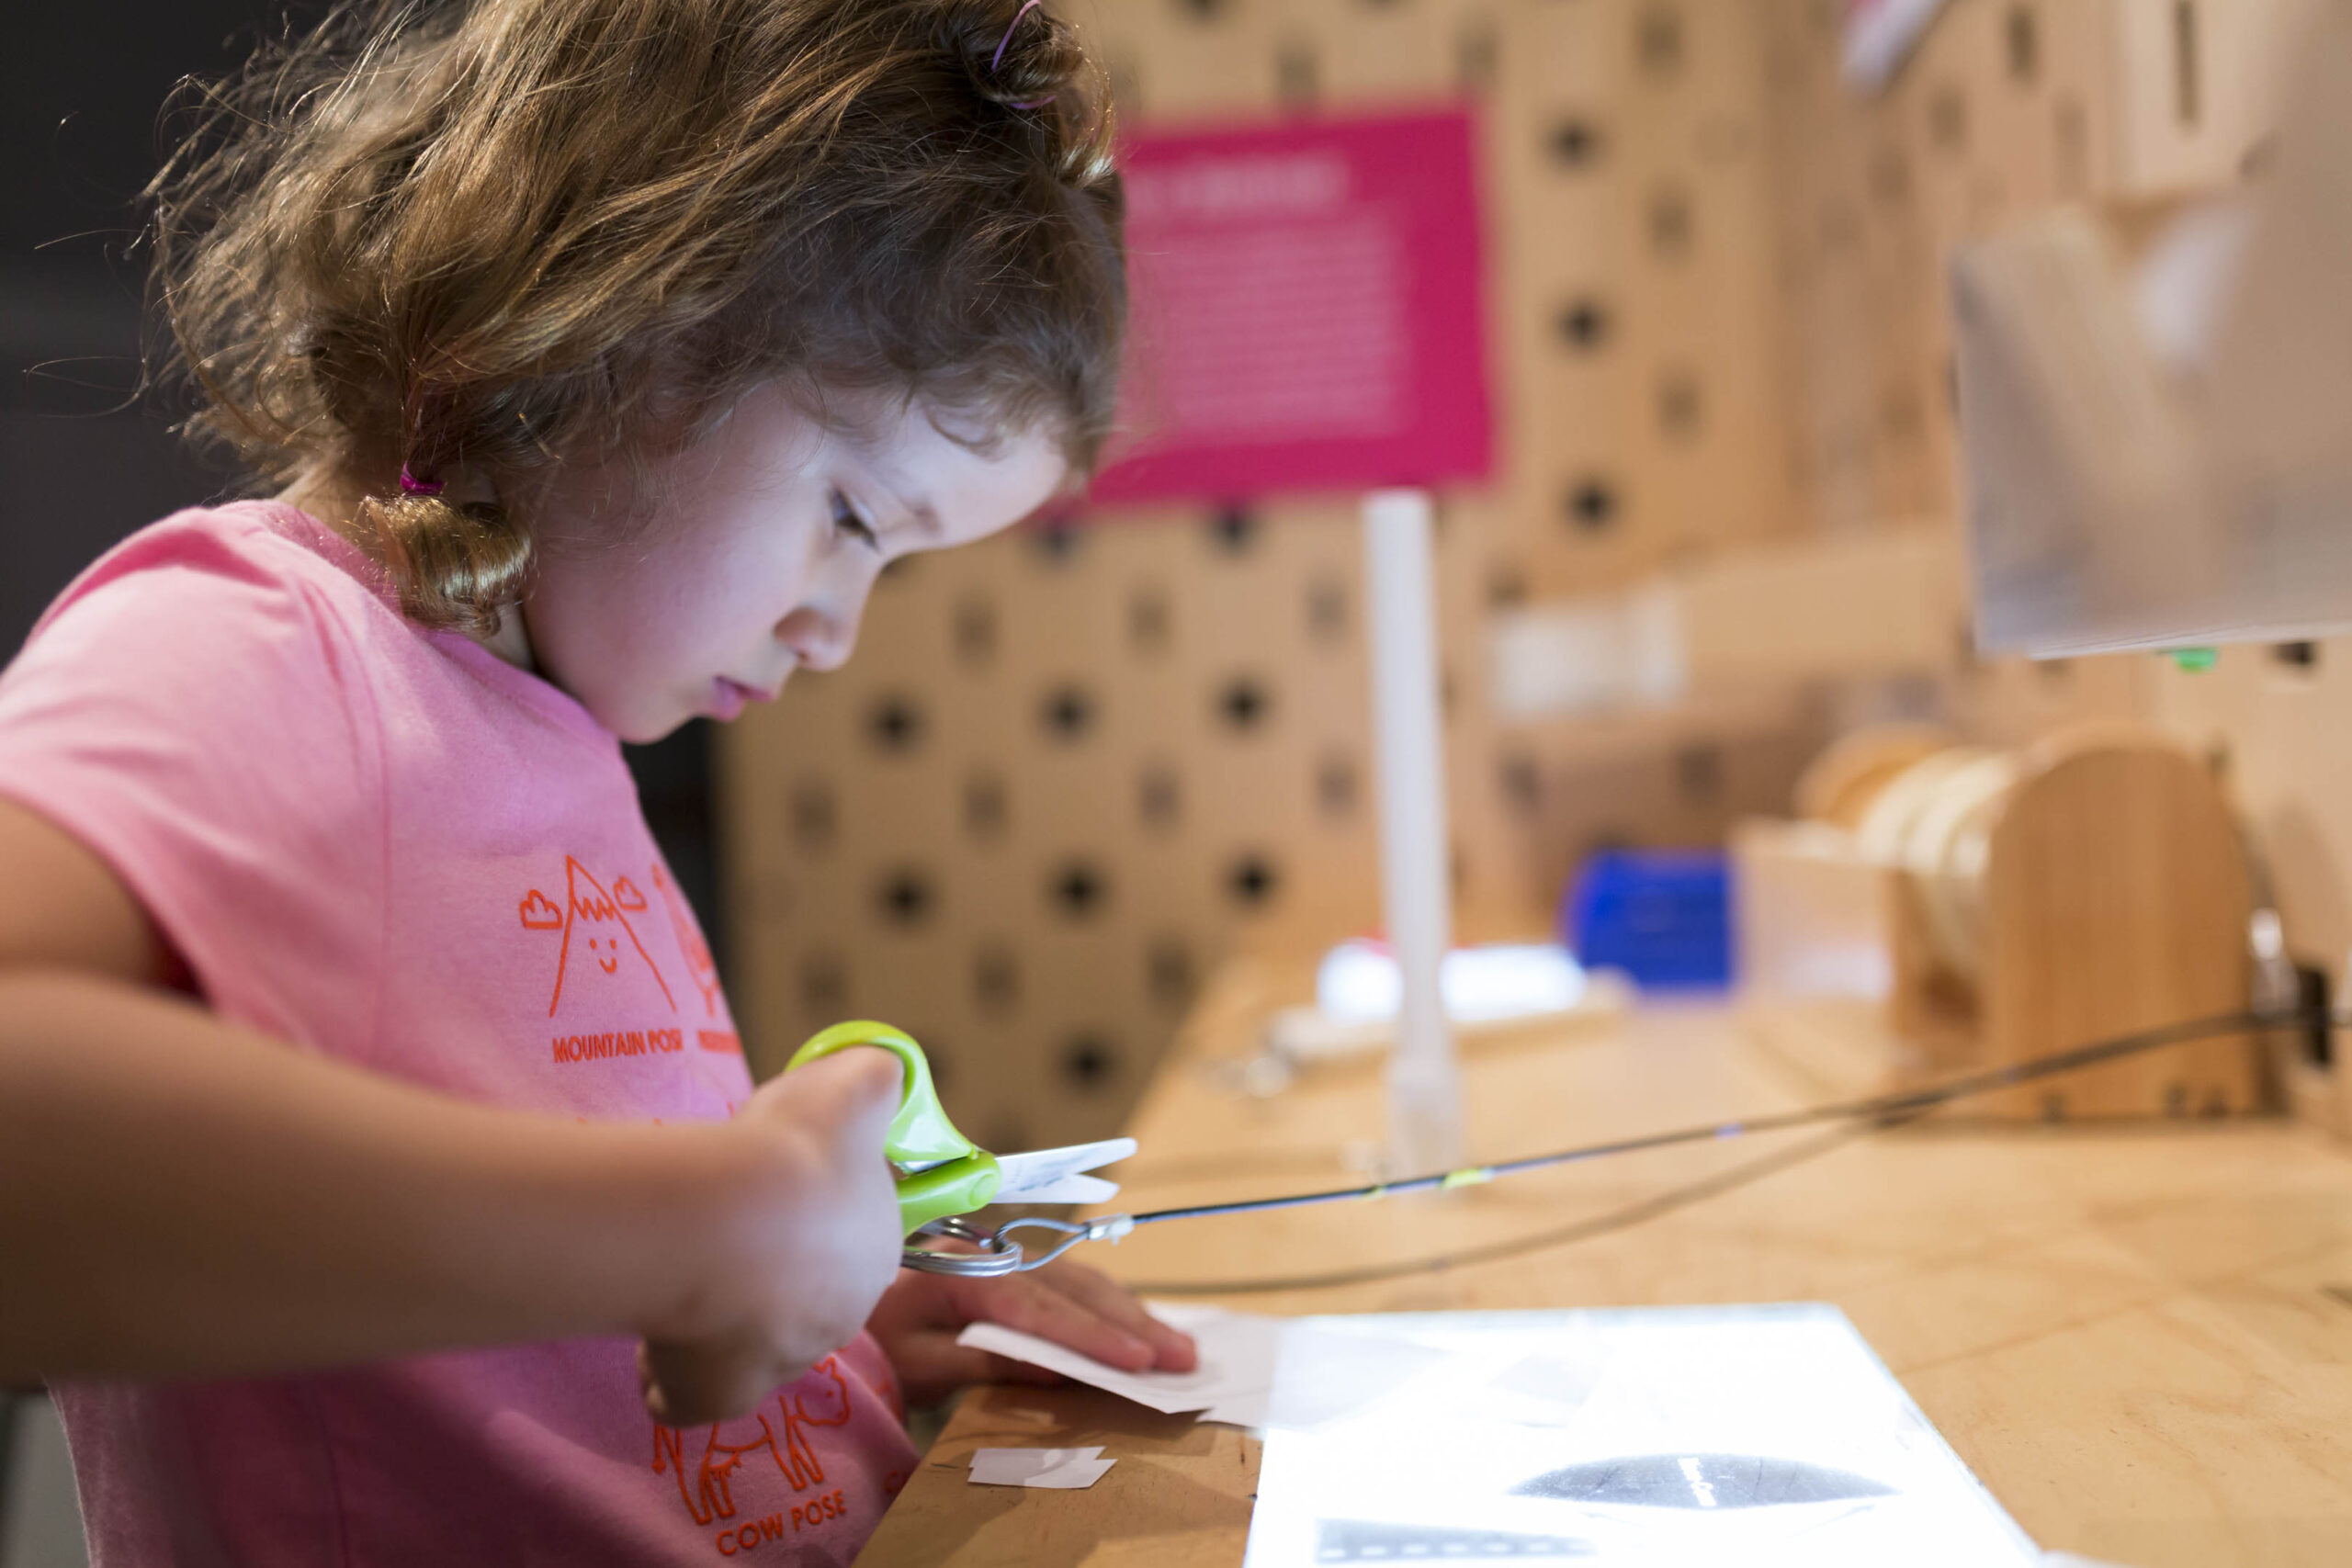 A child creating her own invention at the Make Station exhibit